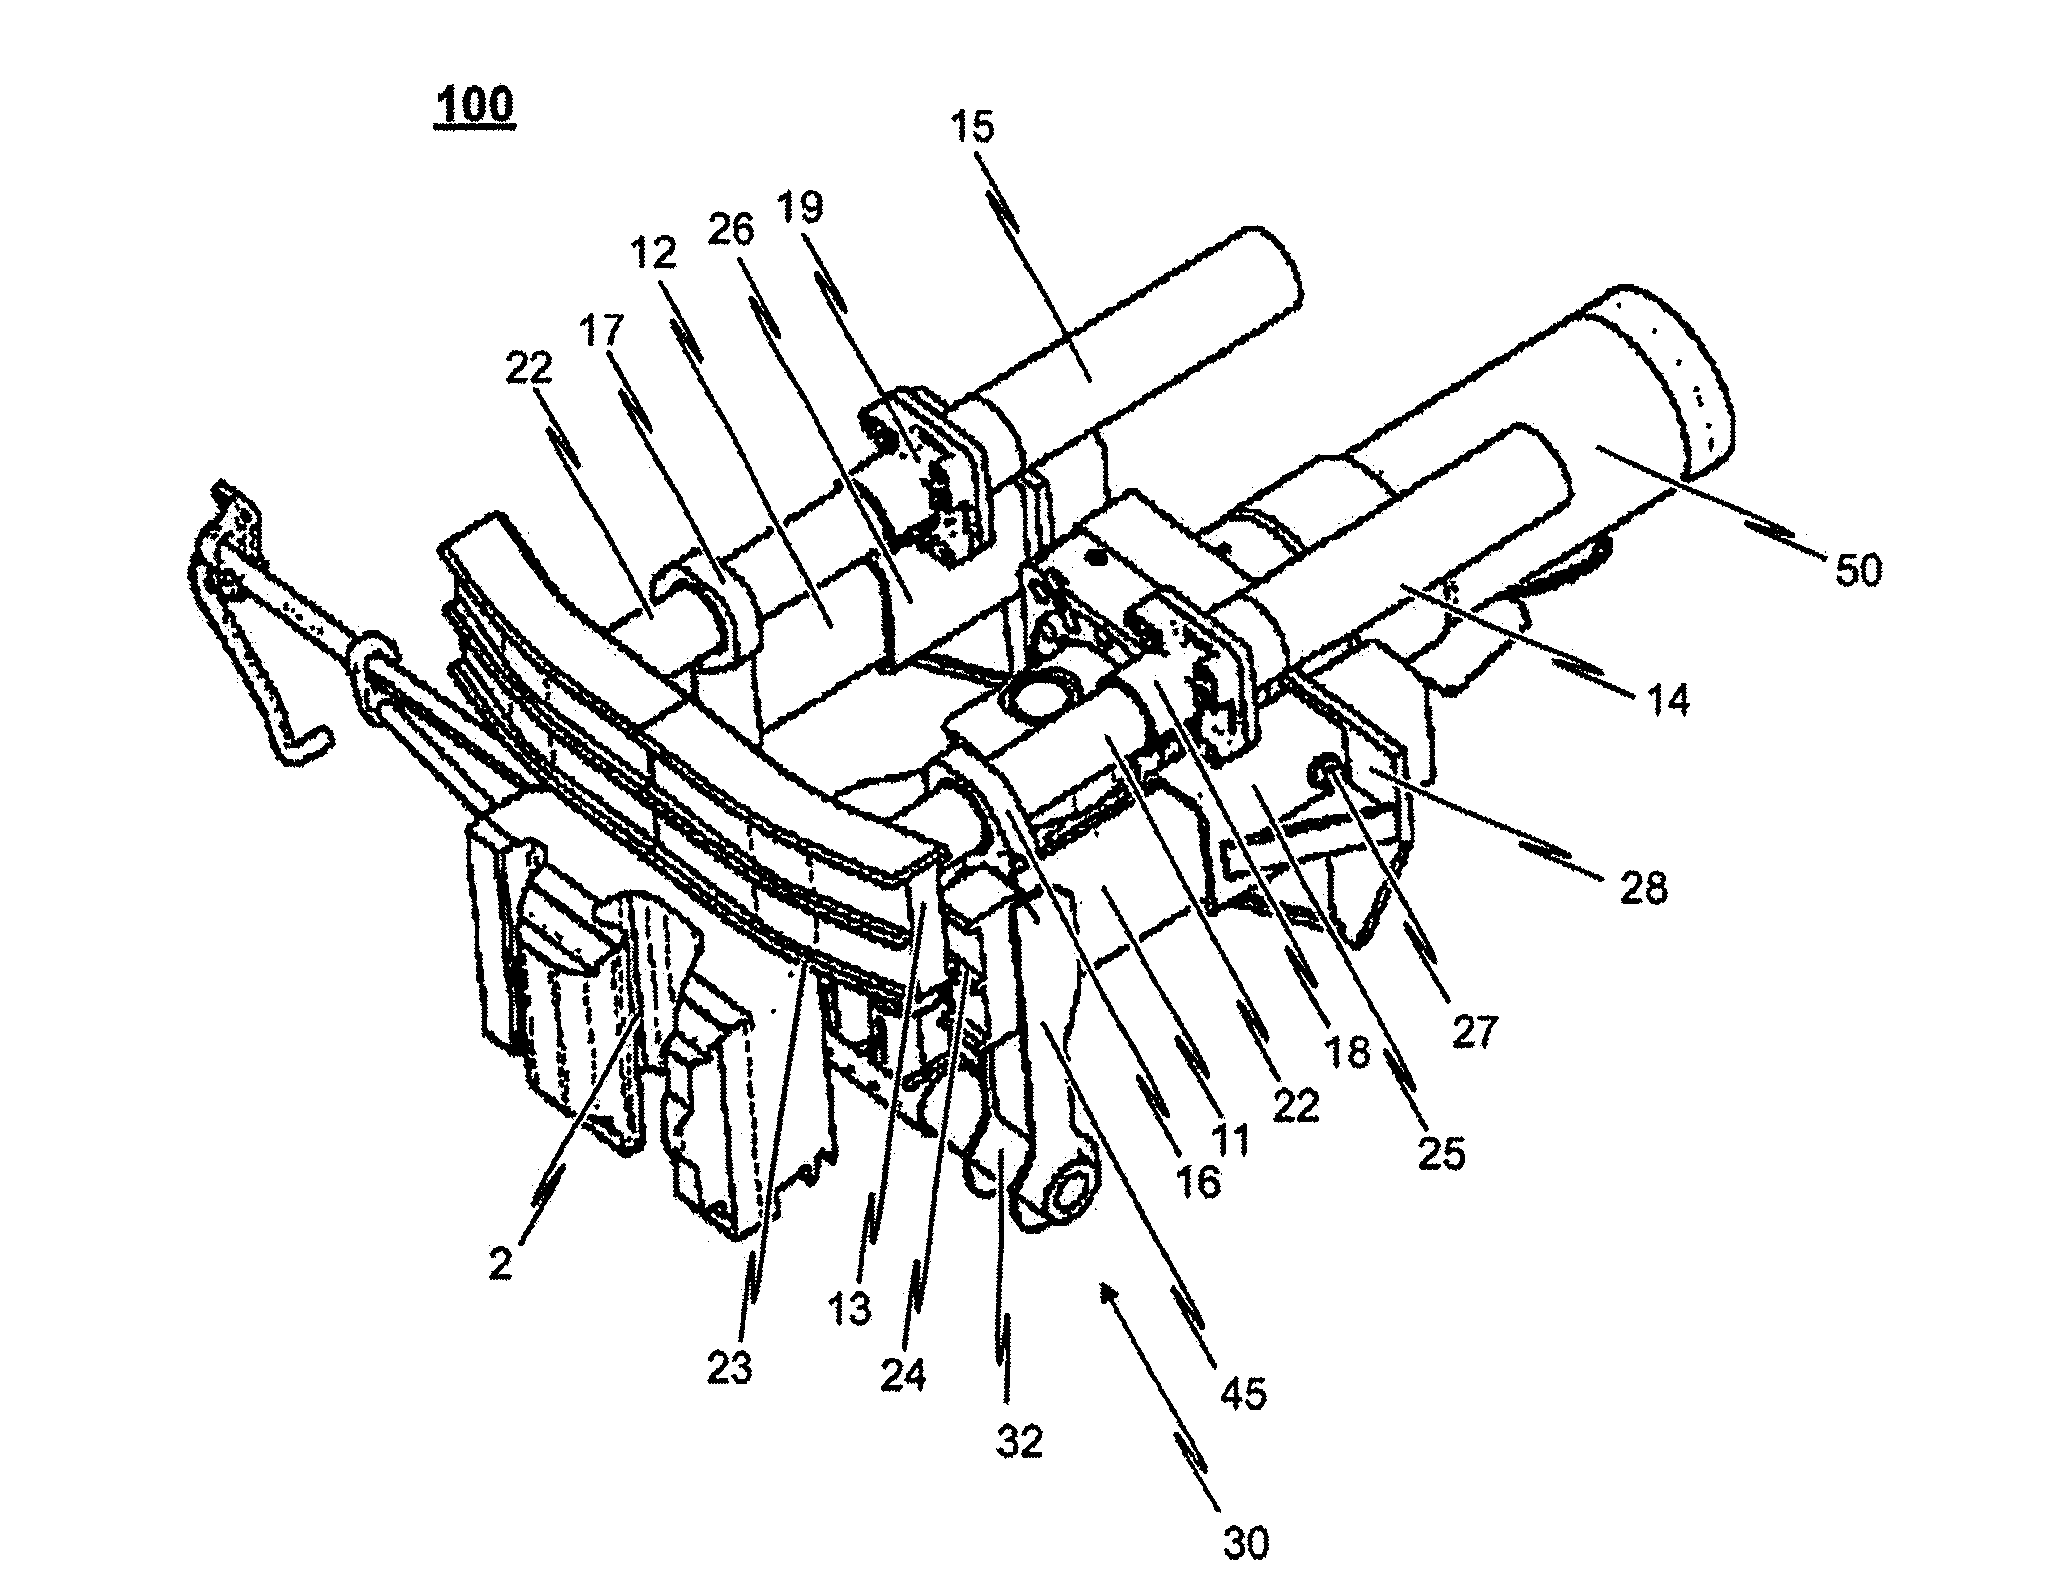 Coupling arrangement for the front of a tracked vehicle